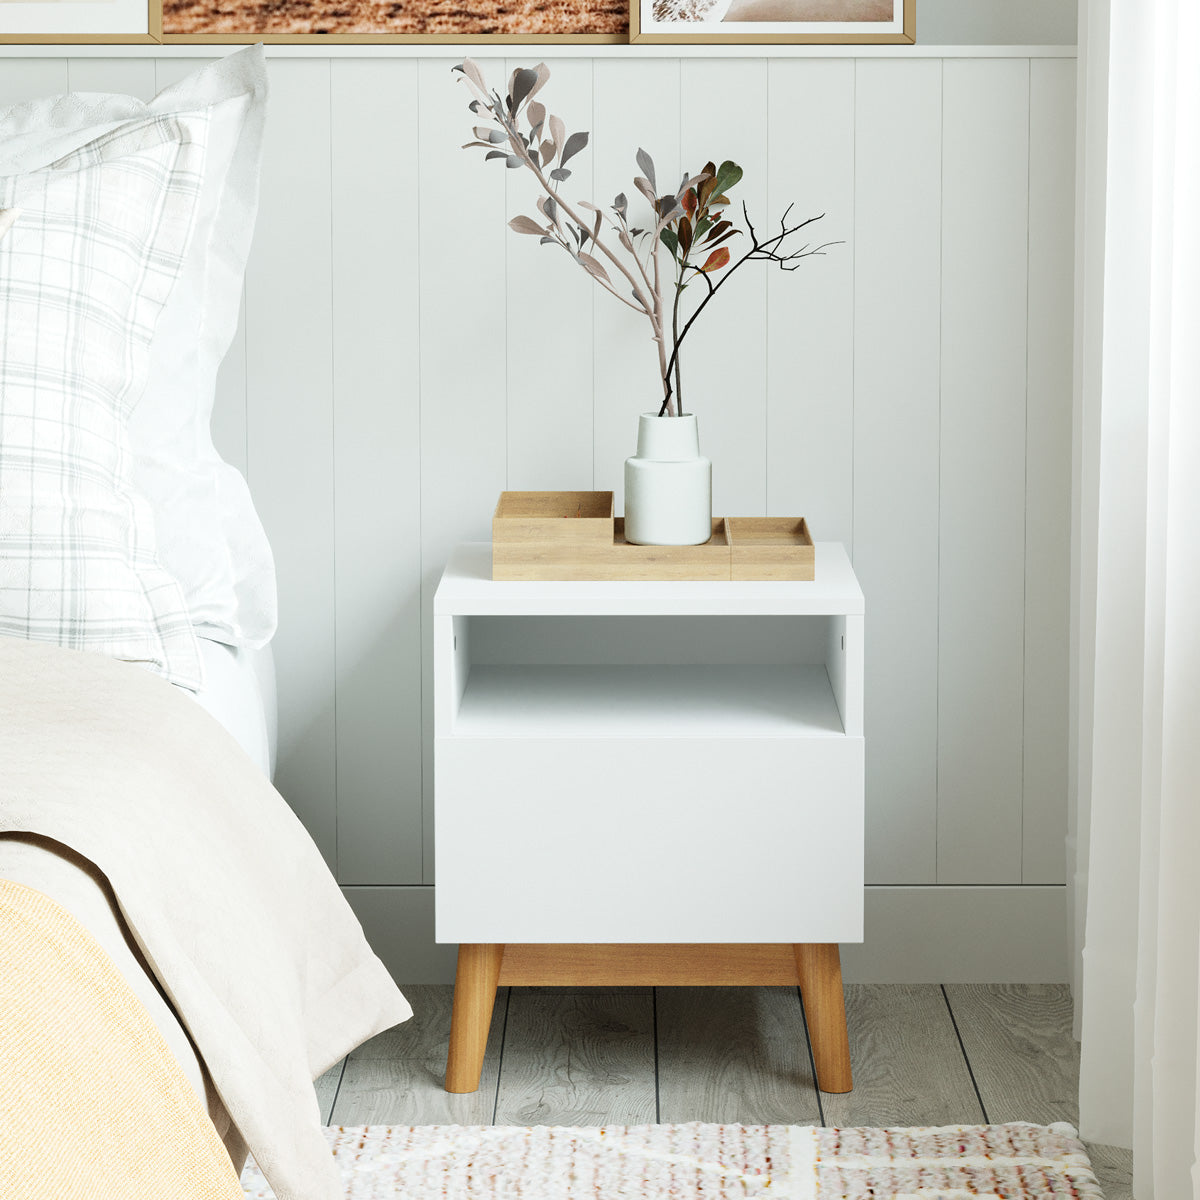 White Wooden Bedside Table with Solid Wood Legs (Aspen)